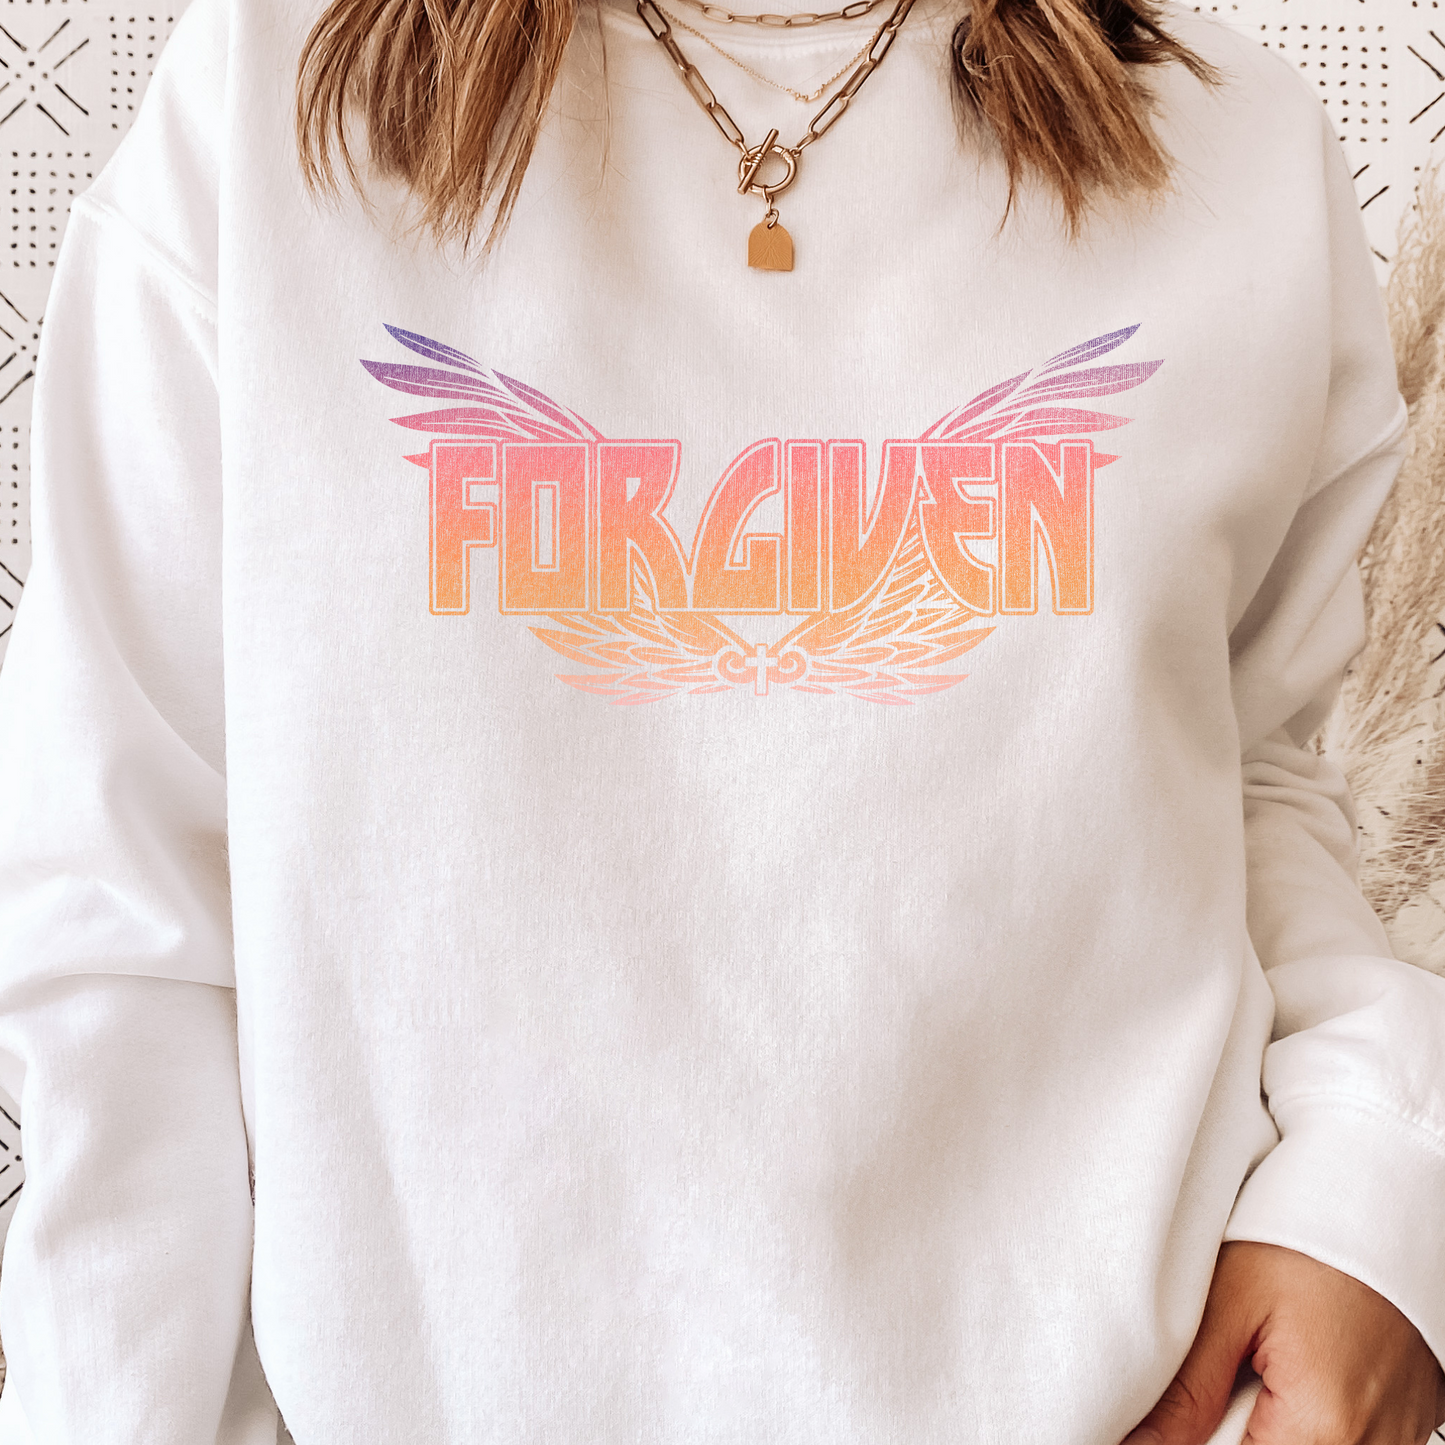 (Shirt not Included) FORGIVEN - CLEAR FILM Transfer